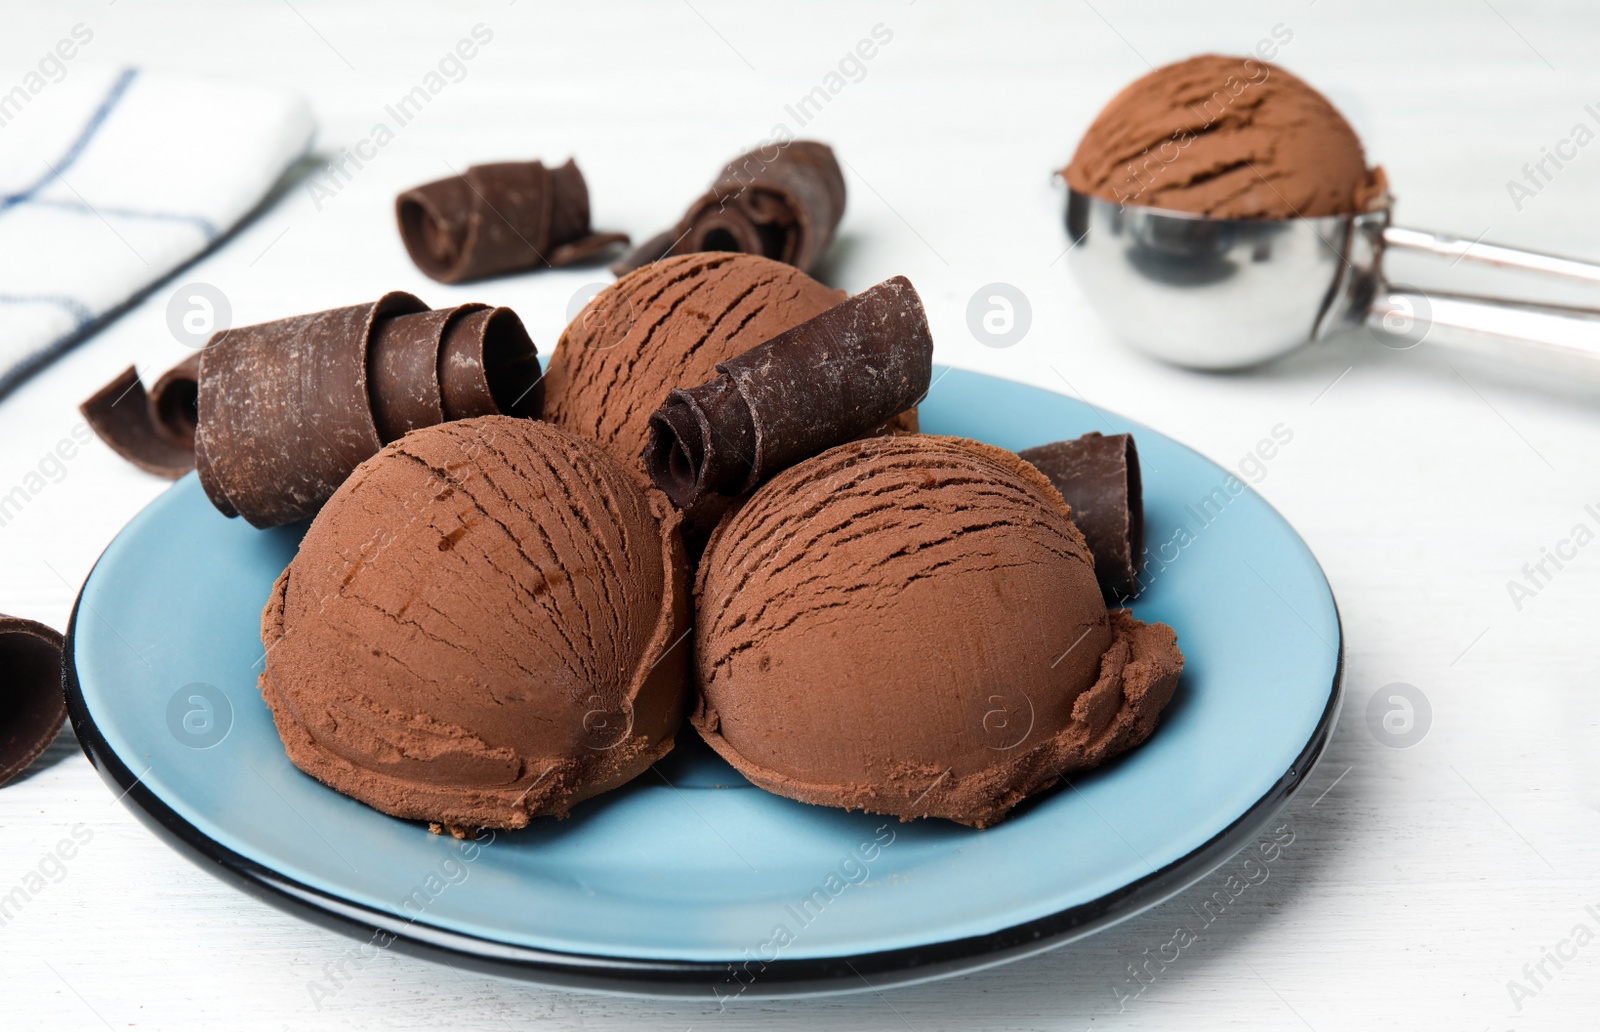 Photo of Plate of ice cream and chocolate curls on white wooden table